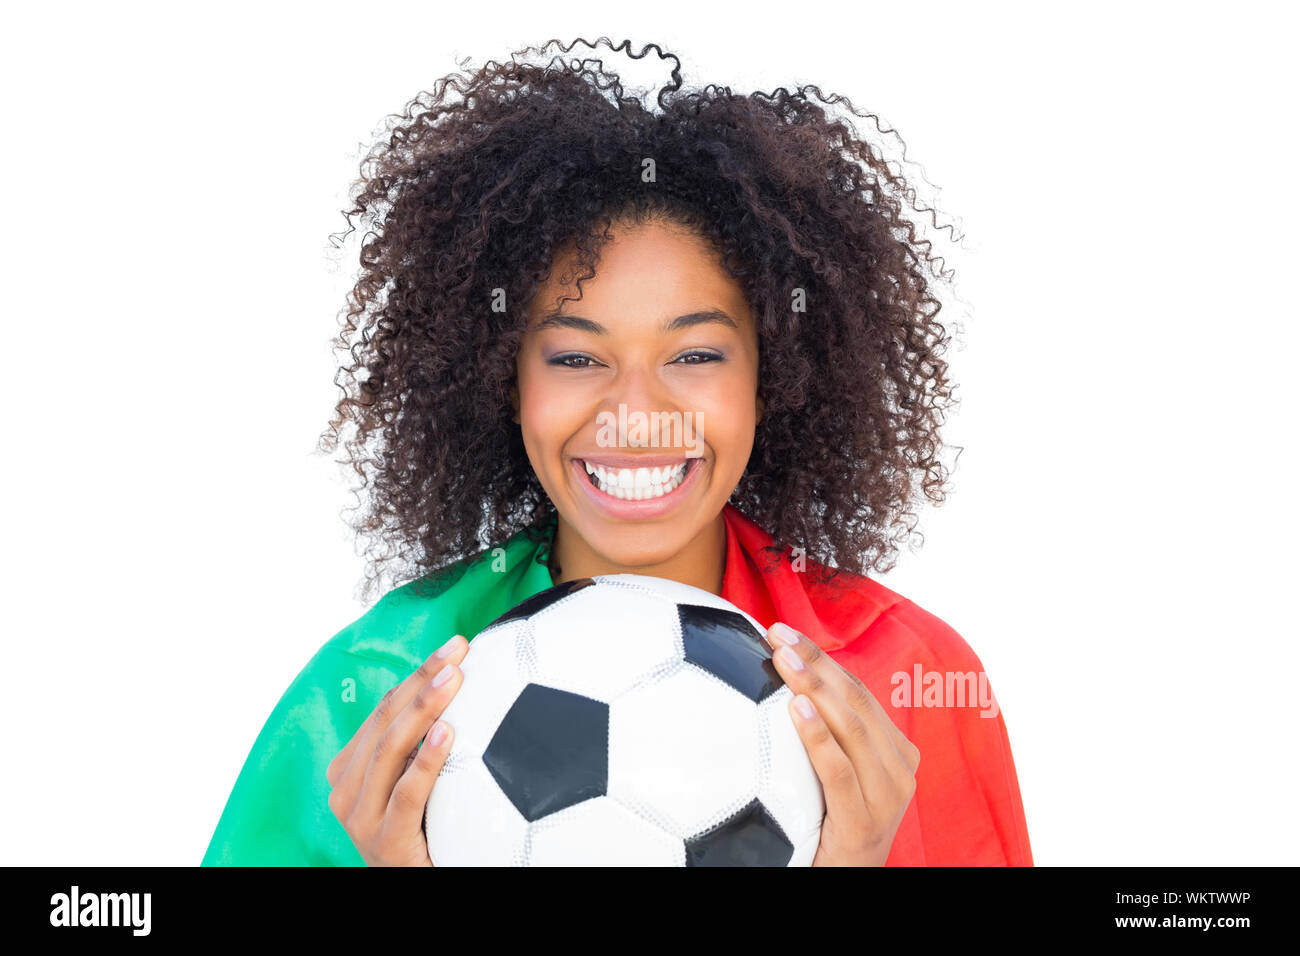 Pretty football fan with portugal flag holding ball on white background Stock Photo